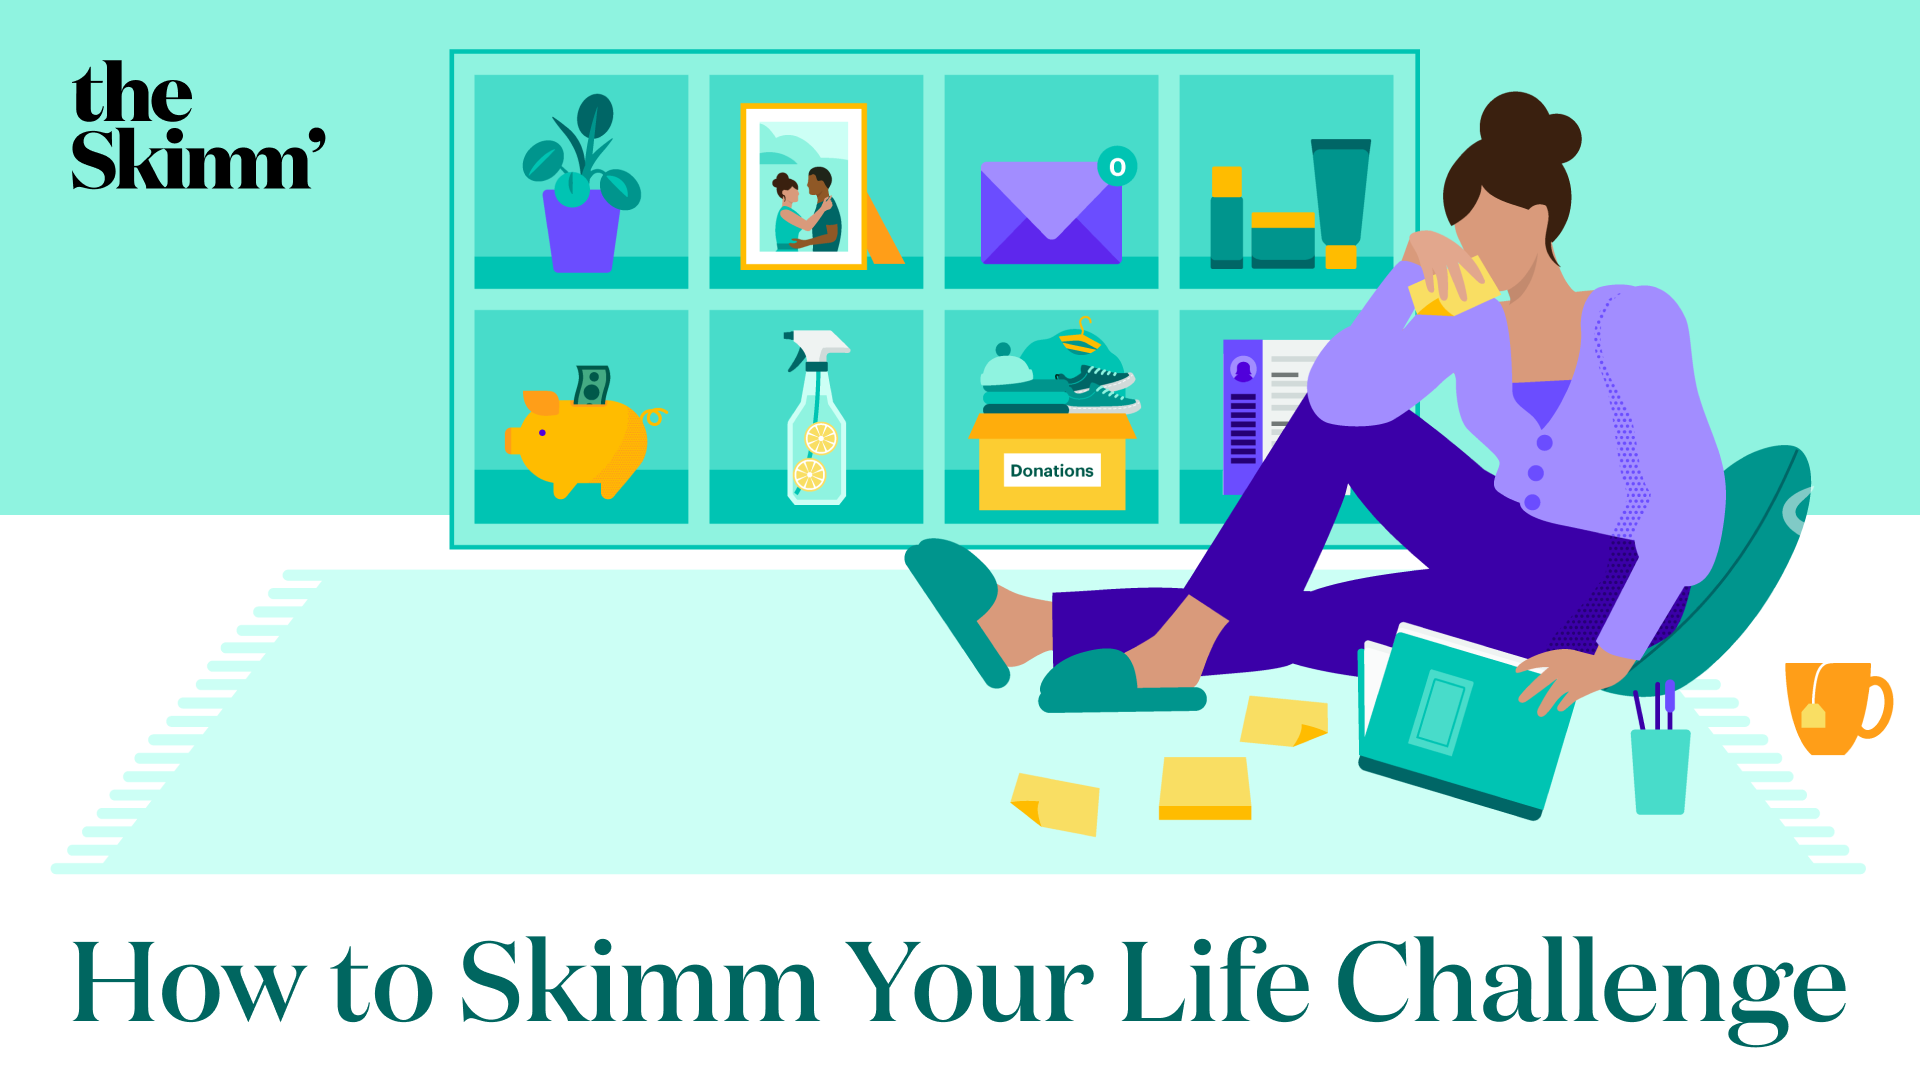 How to Skimm Your Life New Year's Challenge